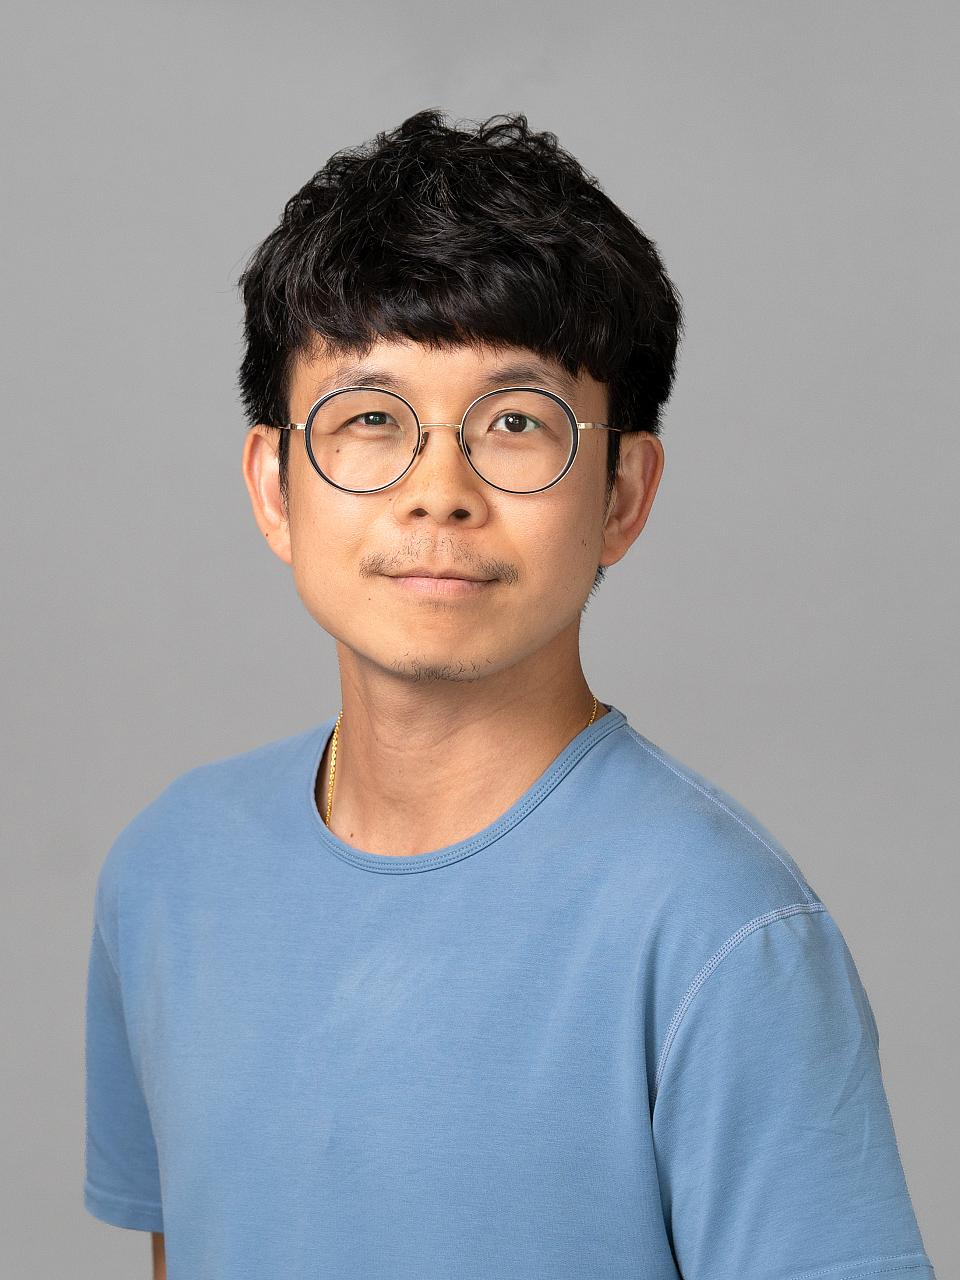 Photo of a man, Dr. Wasawat Vutthikraivit, with short dark hair and glasses wearing a blue shirt smiling at the camera.